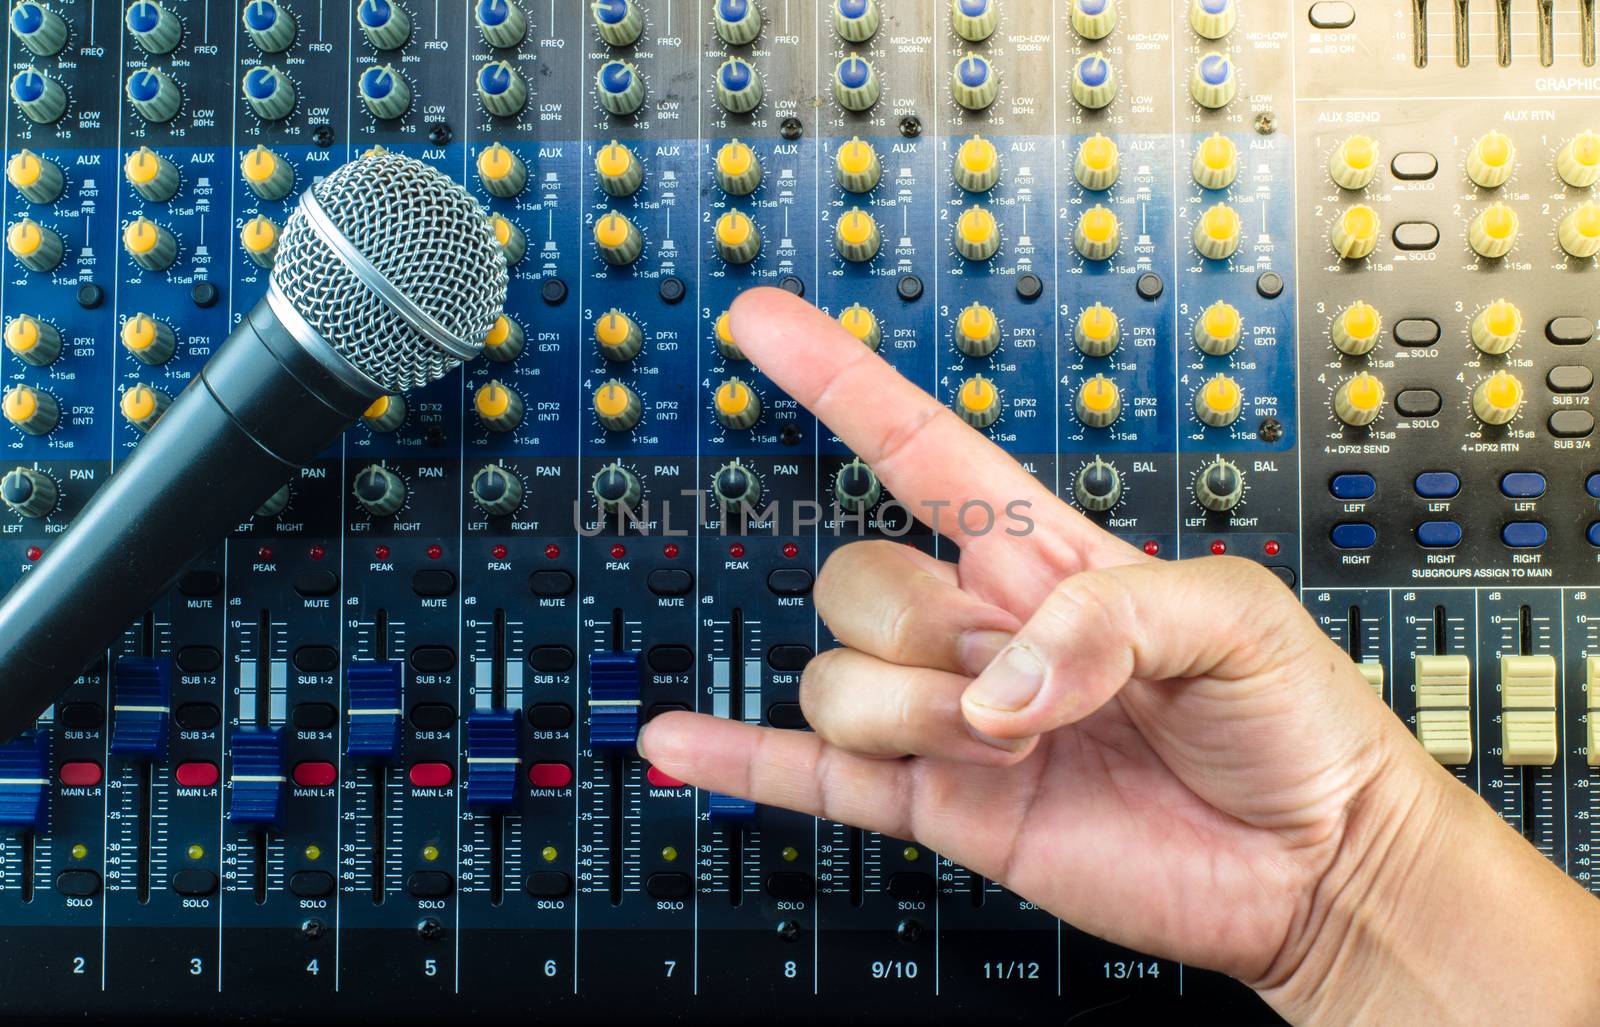 Live Sound Mixers and music studio Hand symbol by metal22